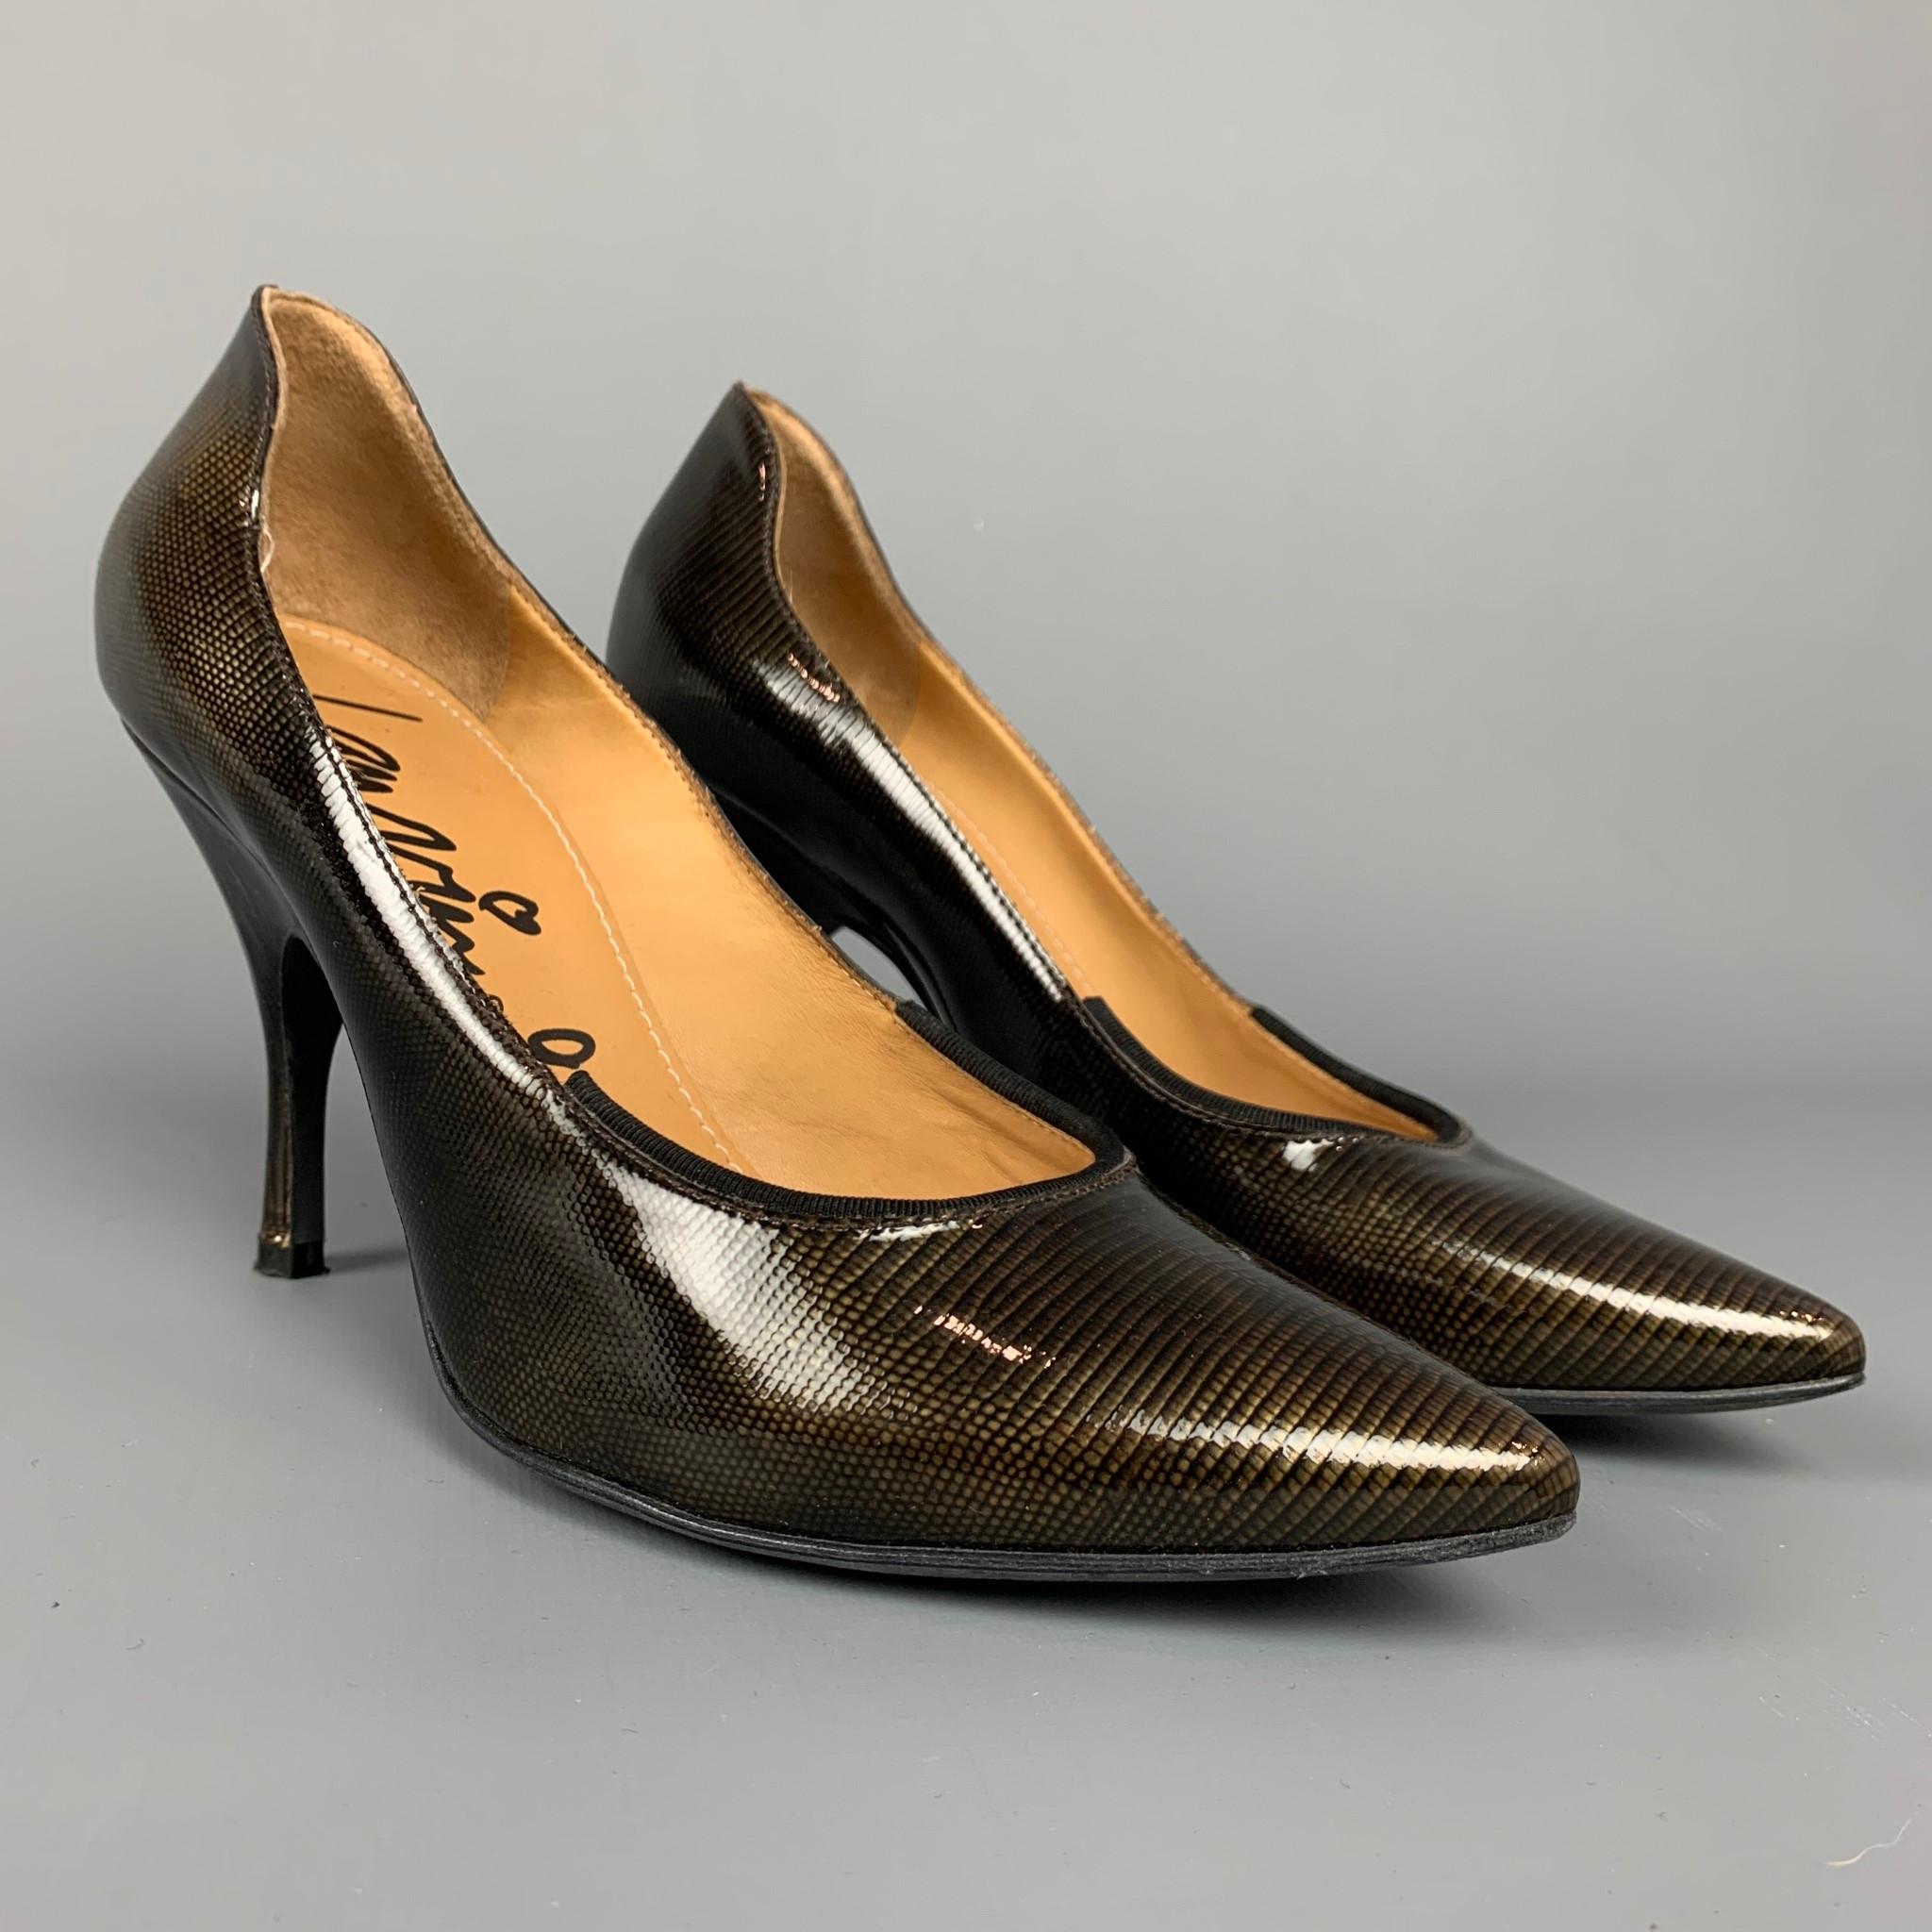 LANVIN for H&M pumps comes in a bronze textured patent leather with a black ribbon trim featuring a pointed toe and a stacked heel. Made in Italy.

Very Good Pre-Owned Condition.
Marked: 38

Measurements:

Heel: 4 in.